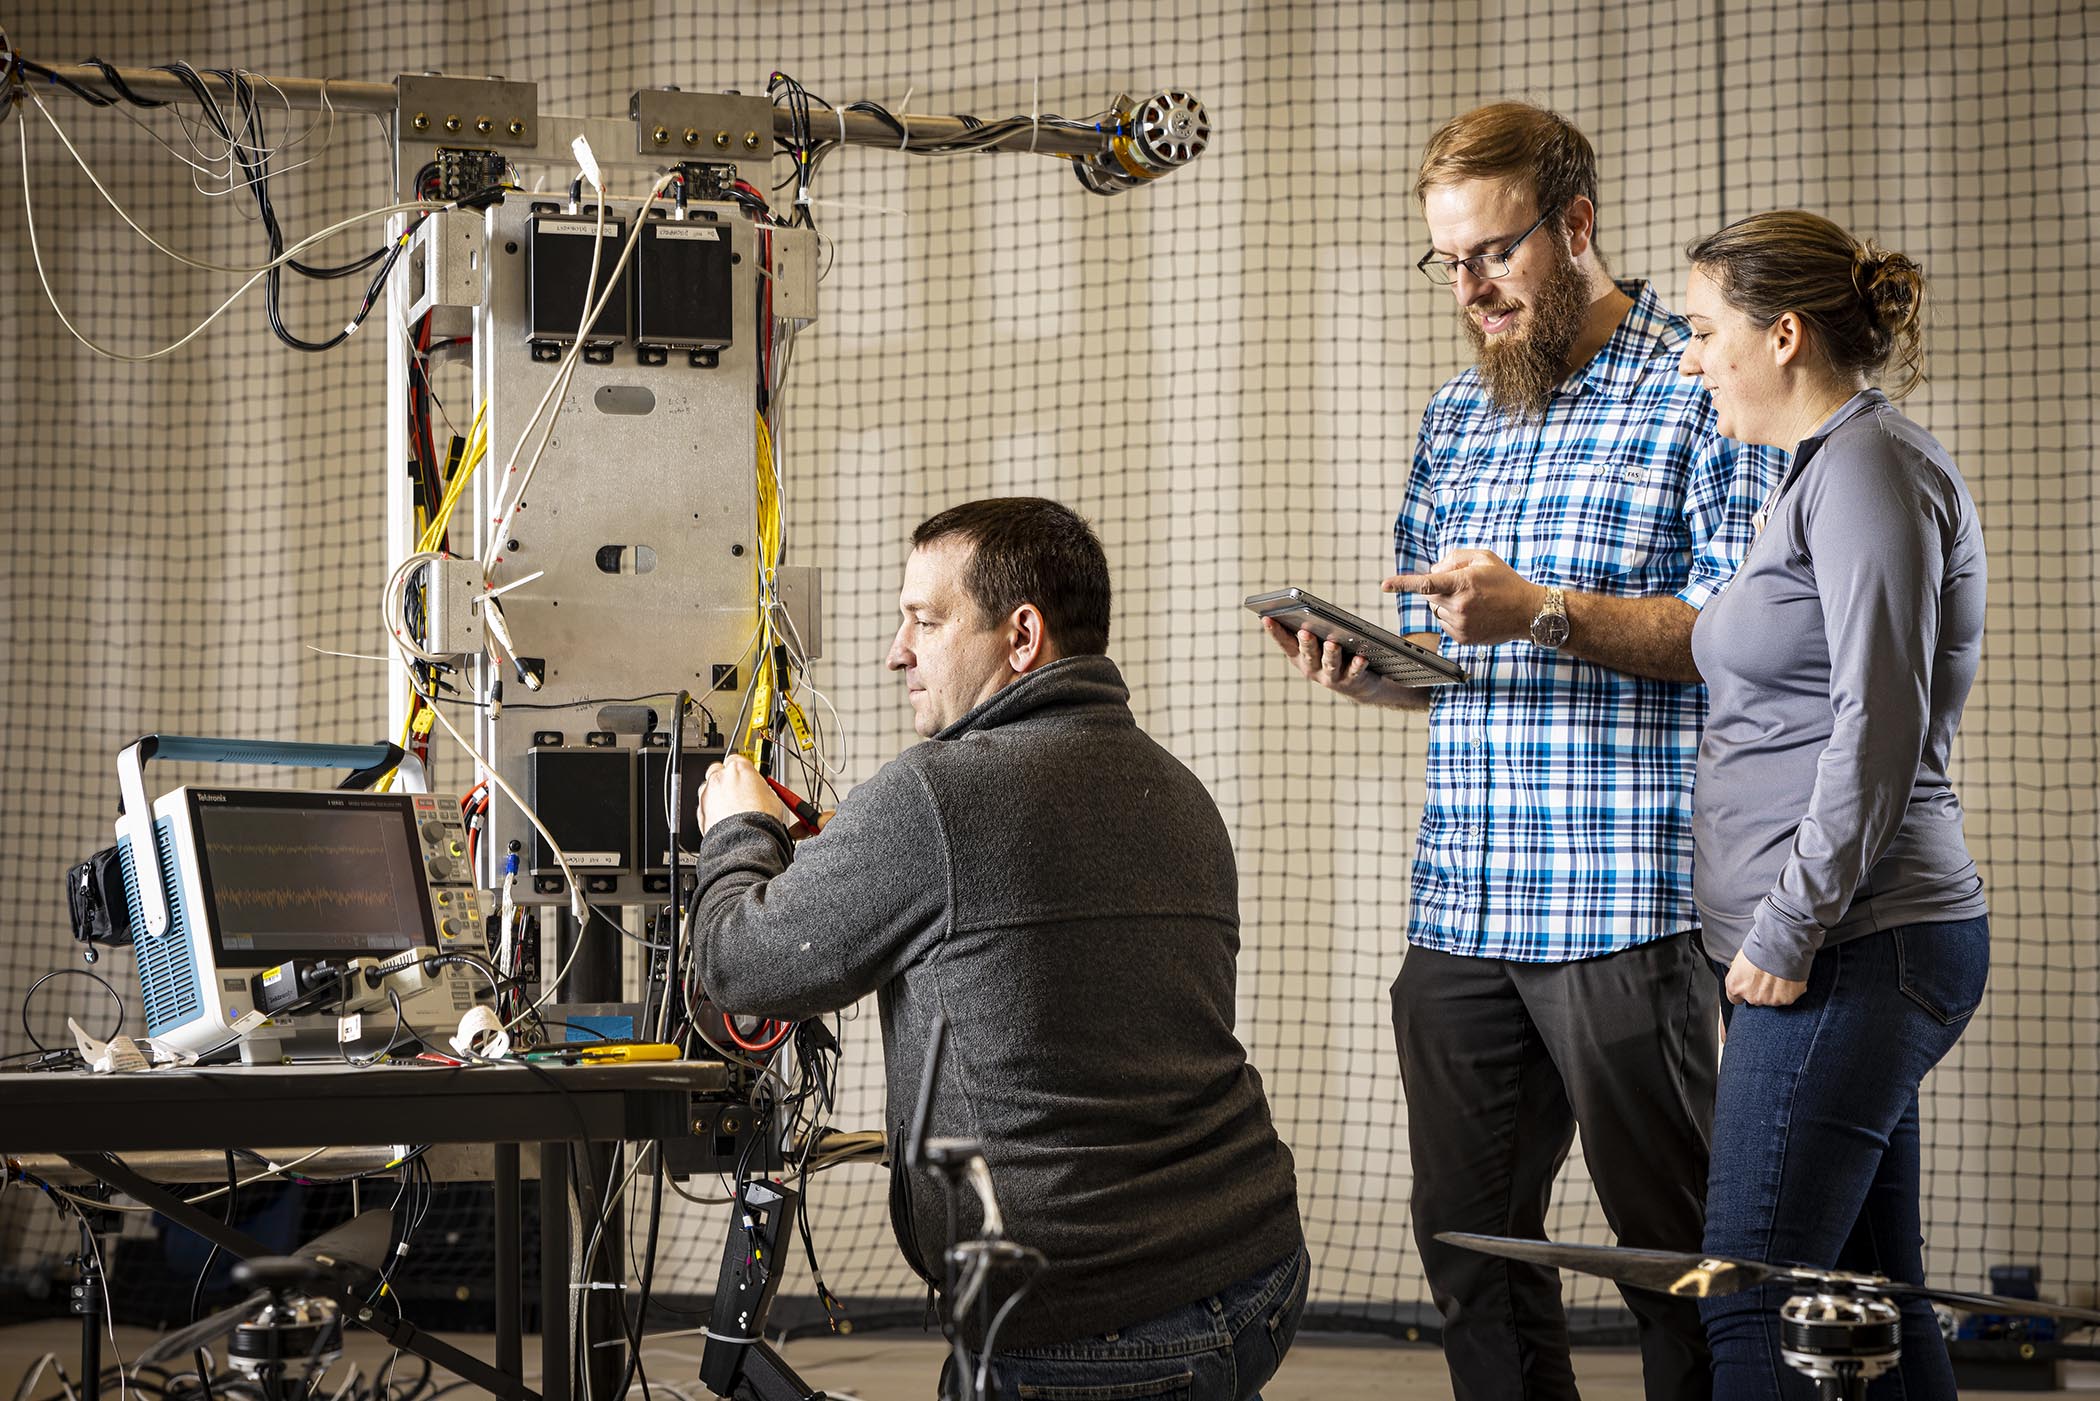 Three researchers stand in front of a test platform of the Dragonfly electronics, one kneeling while looking at a voltmeter, another holding a tablet